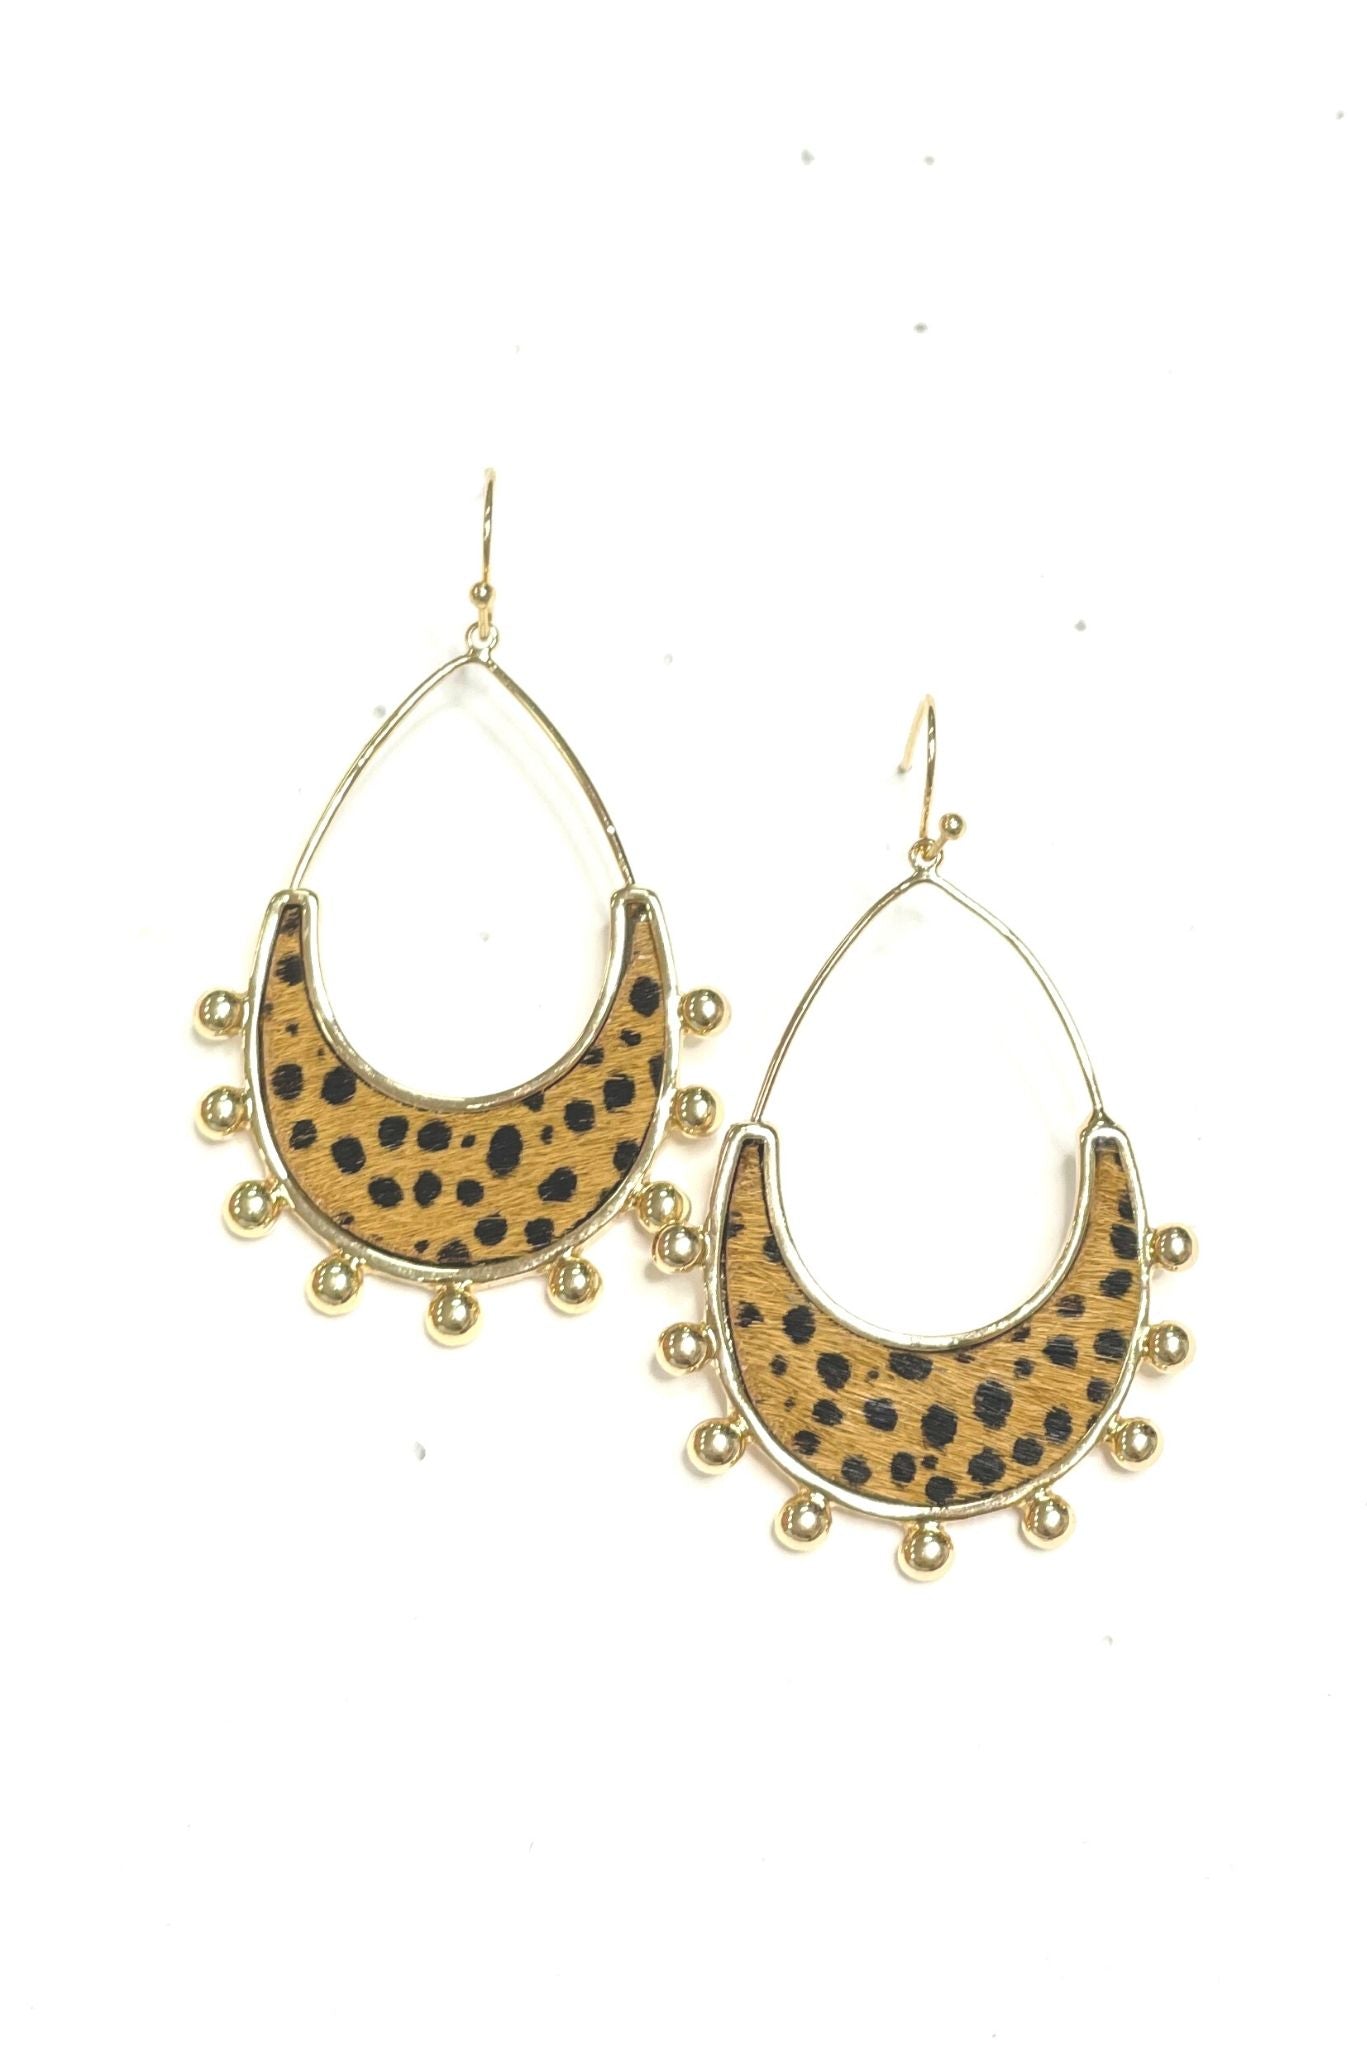 Gold and Small Spotted Hide Teardrop Dangle Earrings